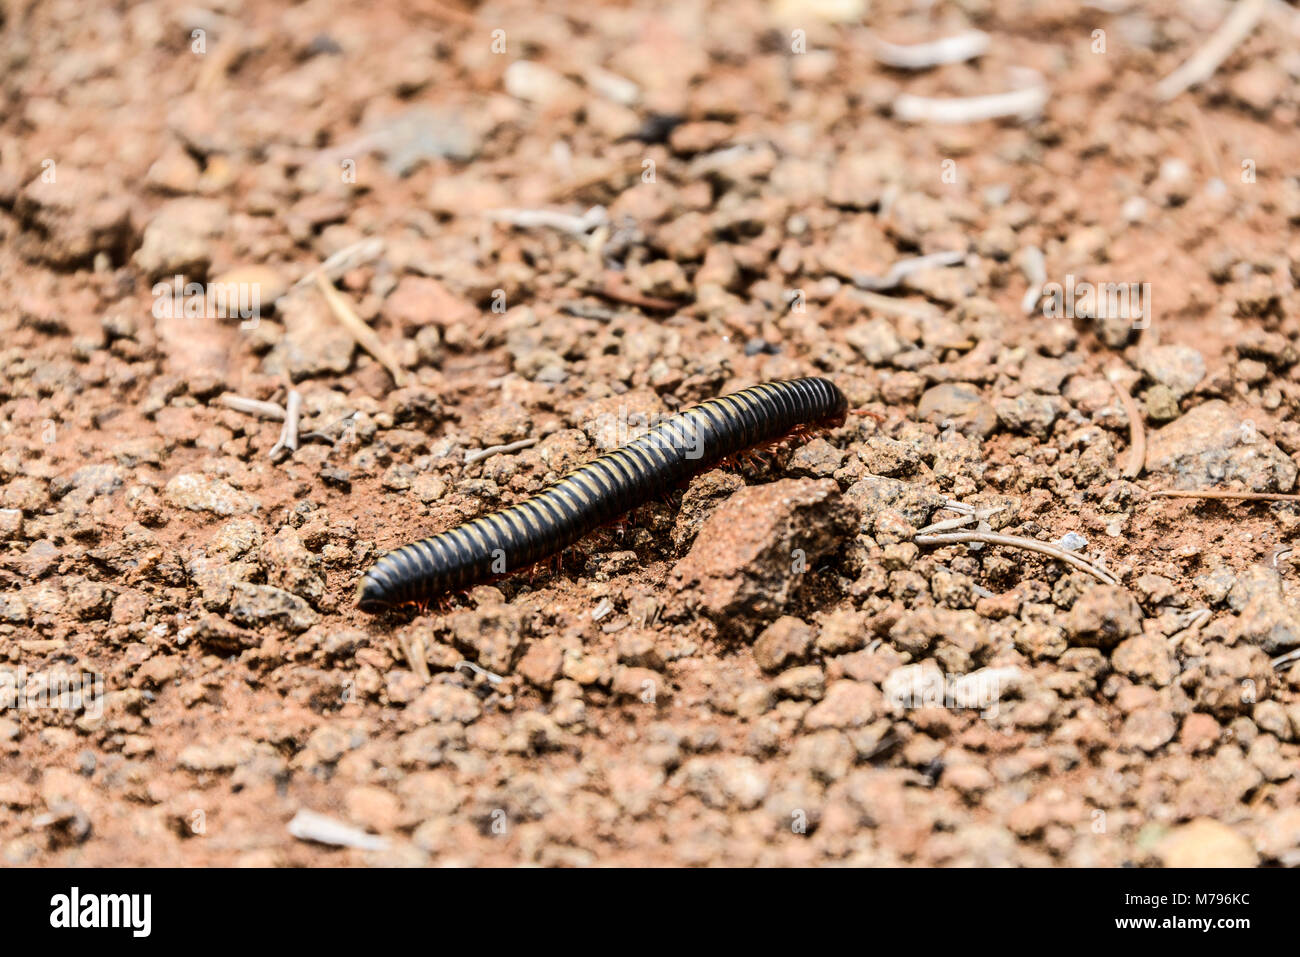 A millipede in South Africa Stock Photo